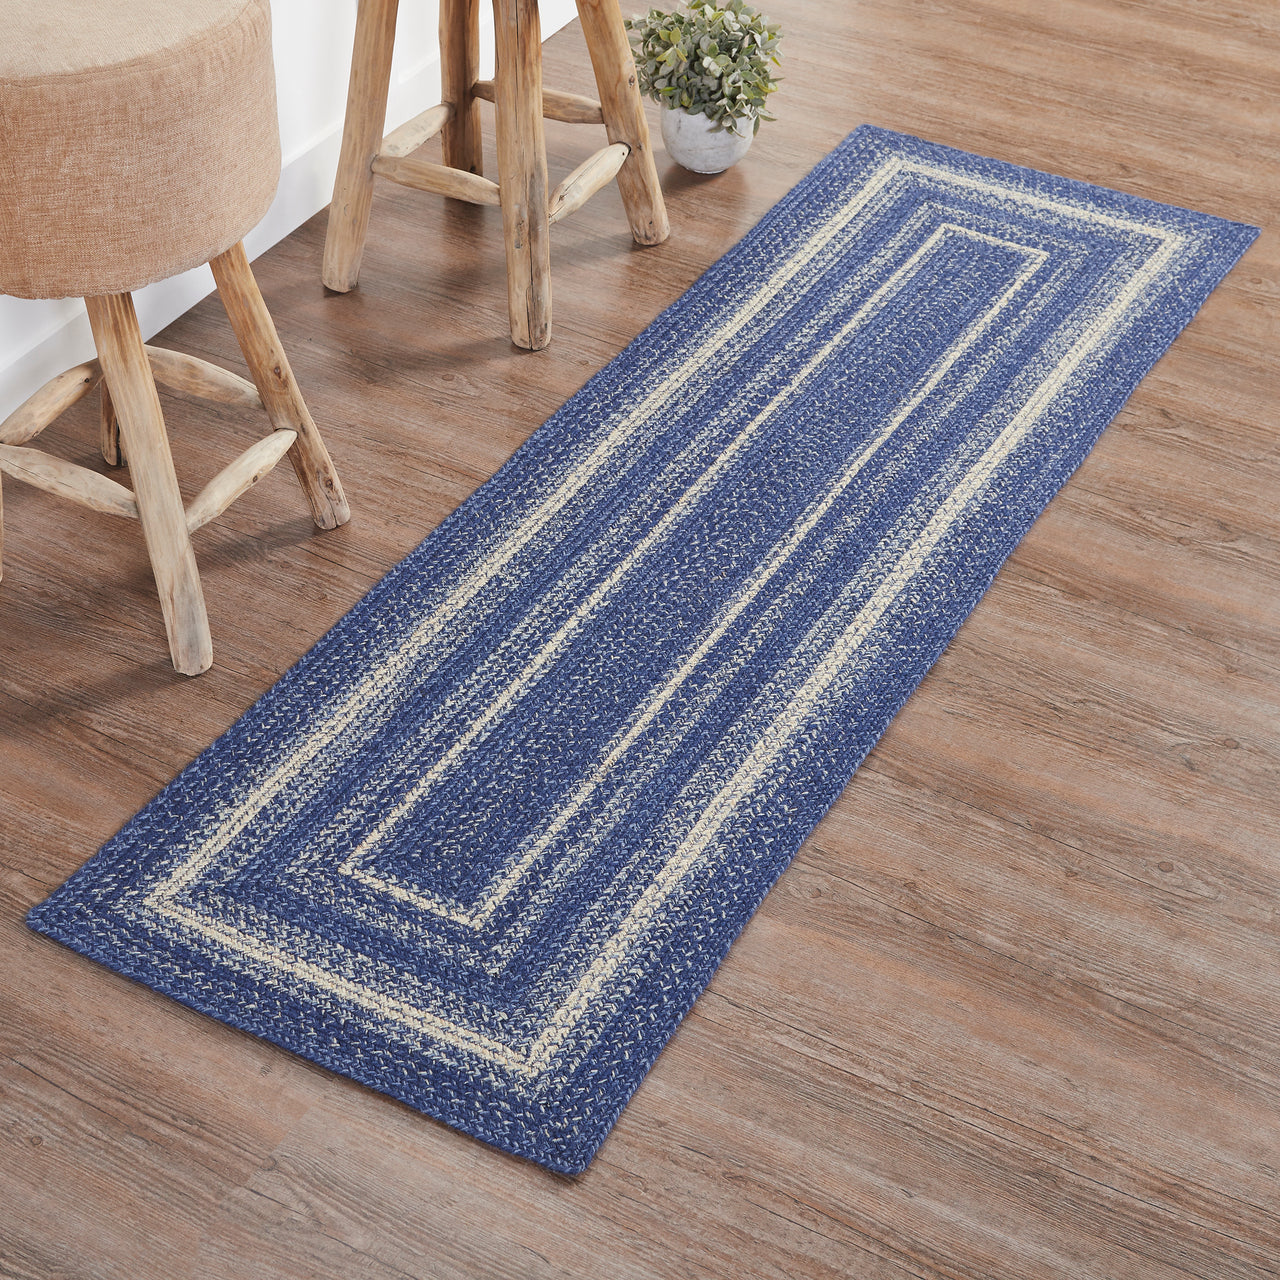 Great Falls Jute Braided Rug/Runner Rect. with Rug Pad 2'x6.5' VHC Brands